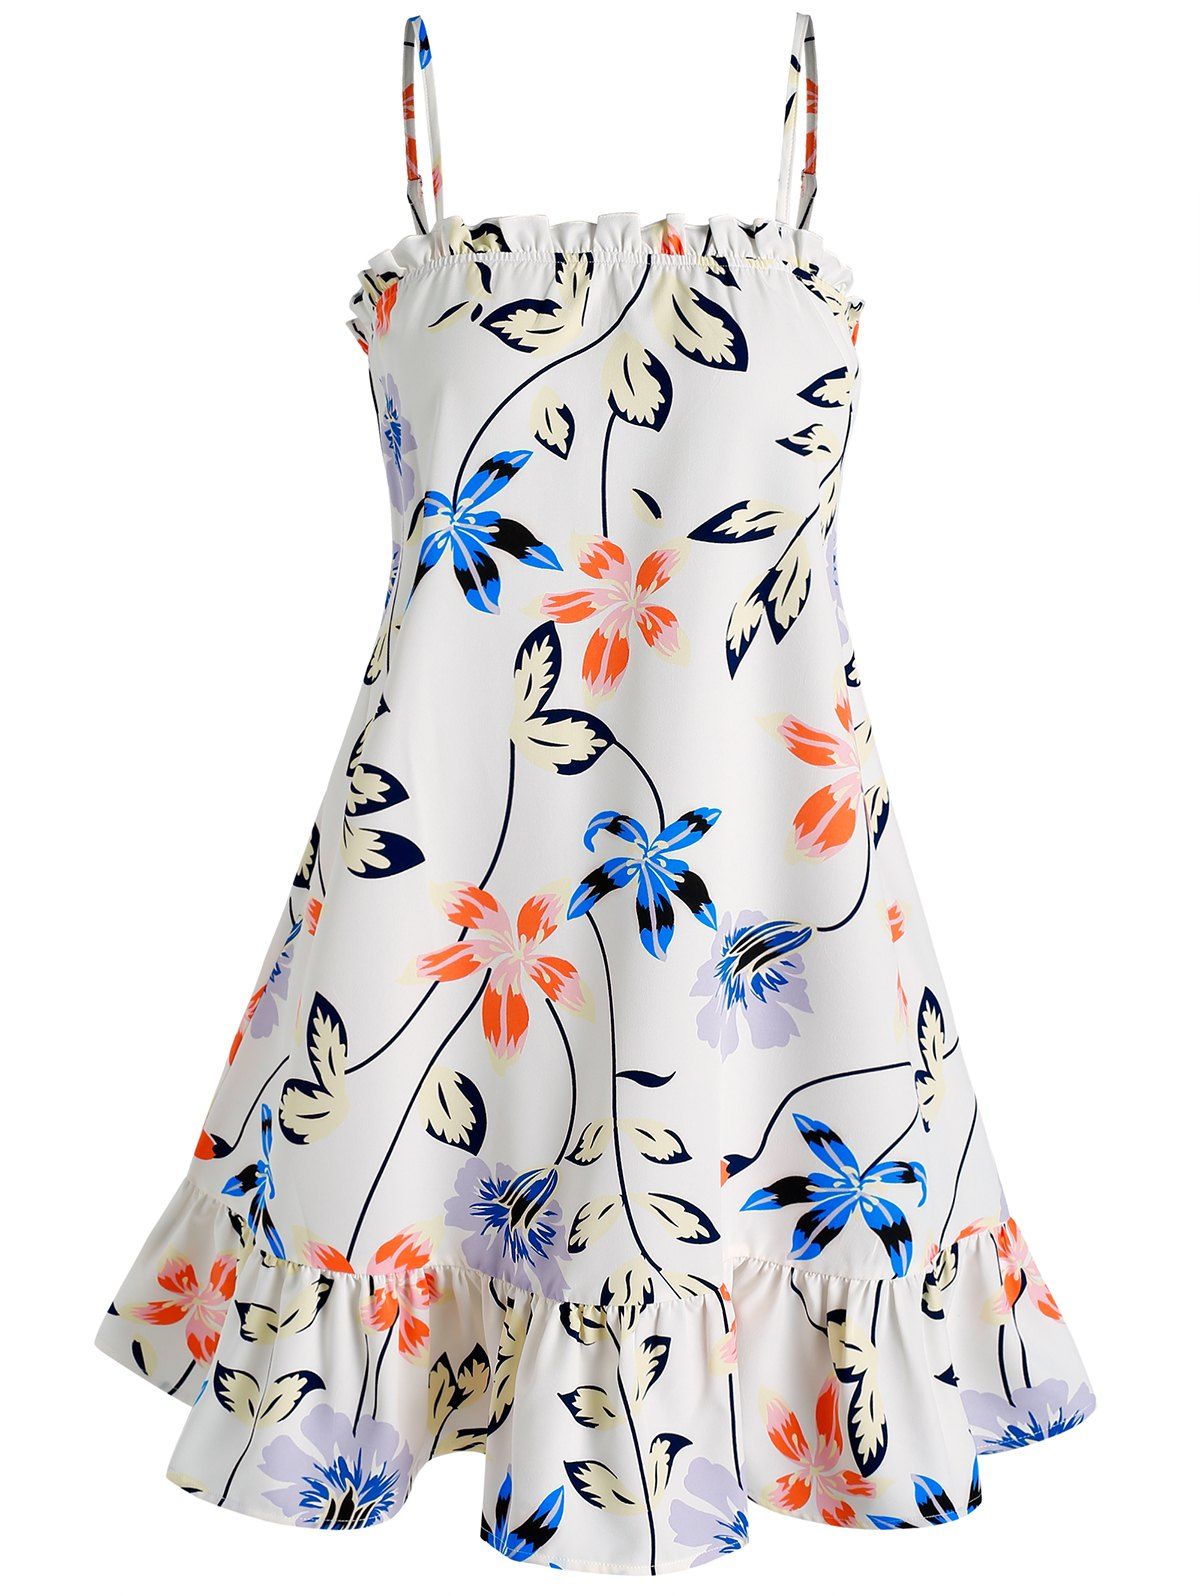 Flower and Leaves Print Flounced Cami Dress - WHITE L